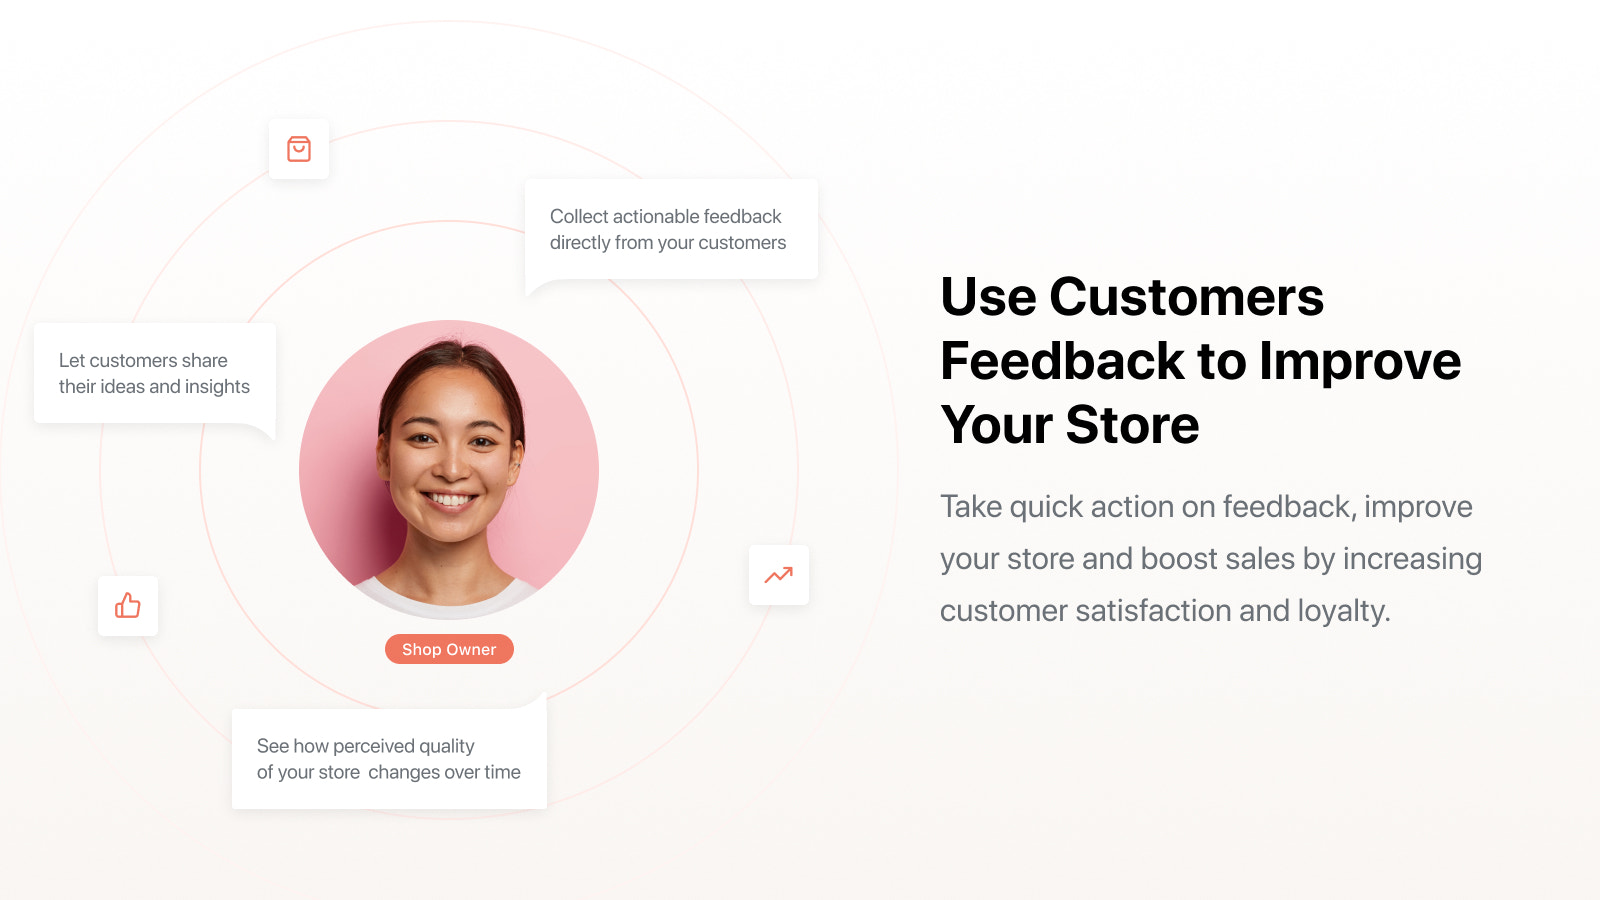 Use Customers Feedback to Improve Your Store